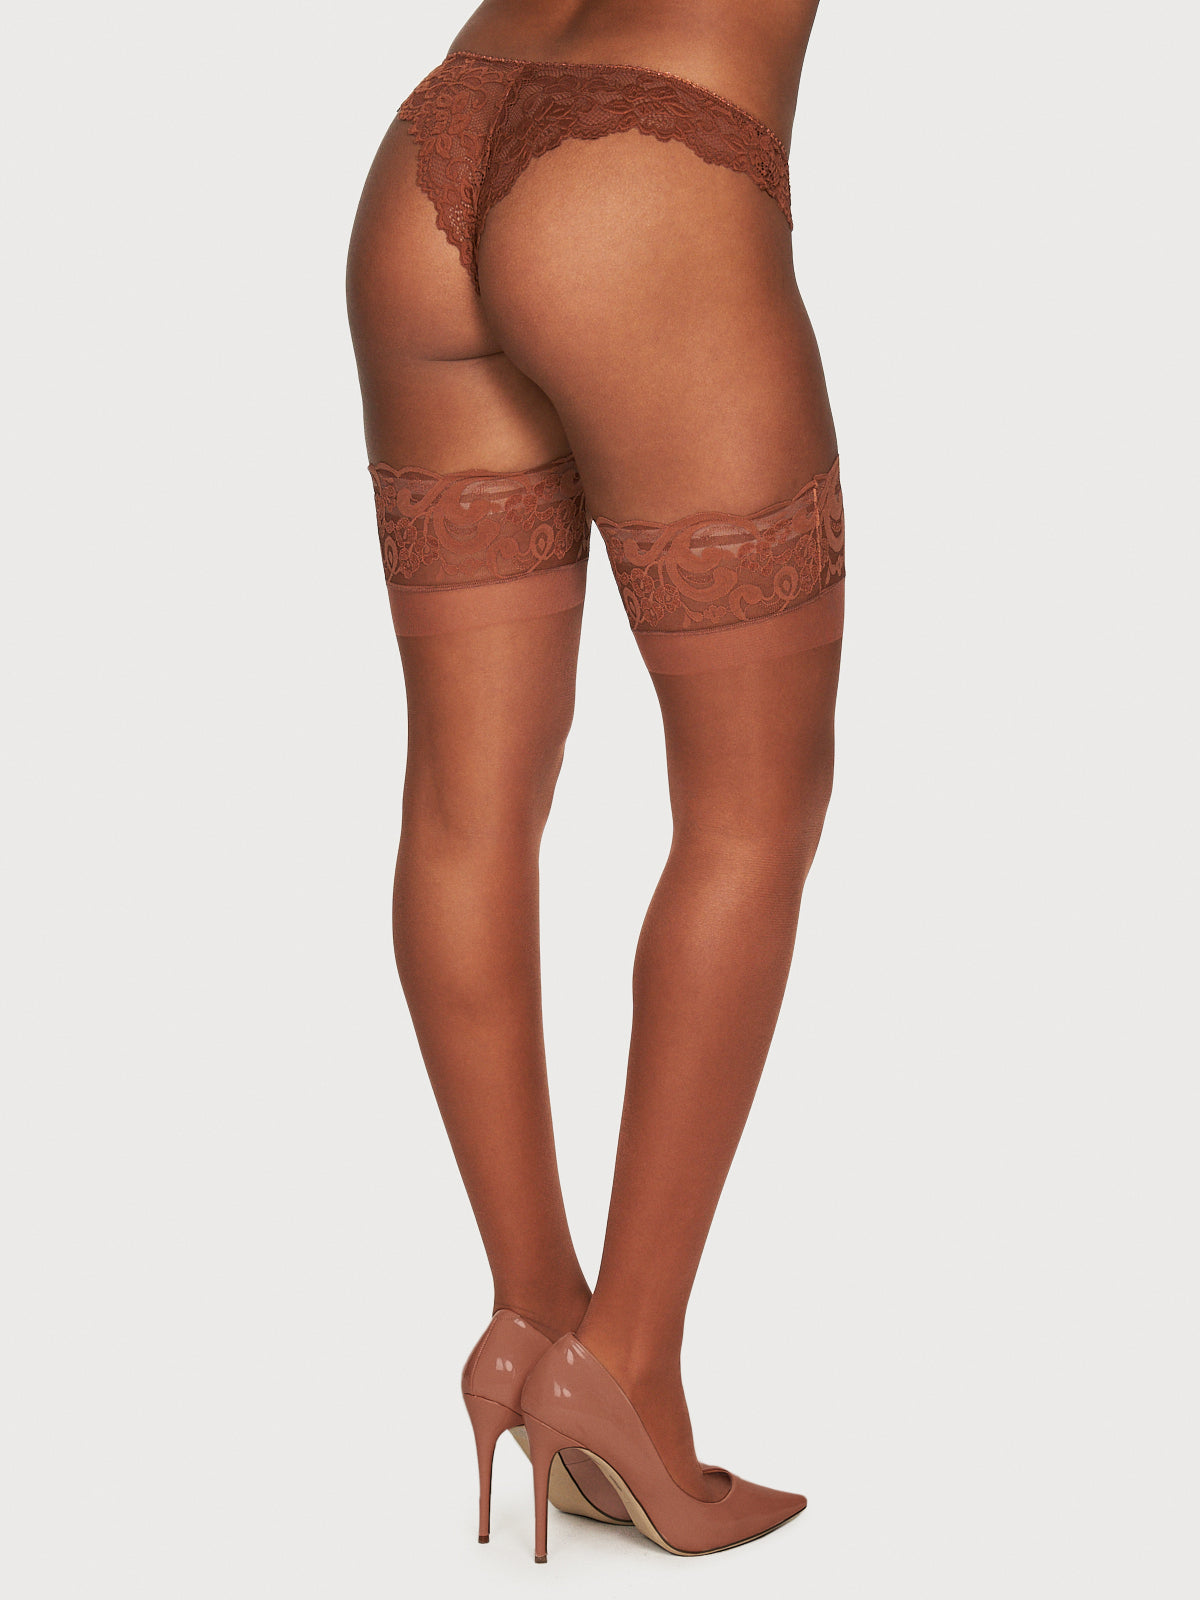 Cassie Lace Stay Up Thigh Highs - Fredericks of Hollywood